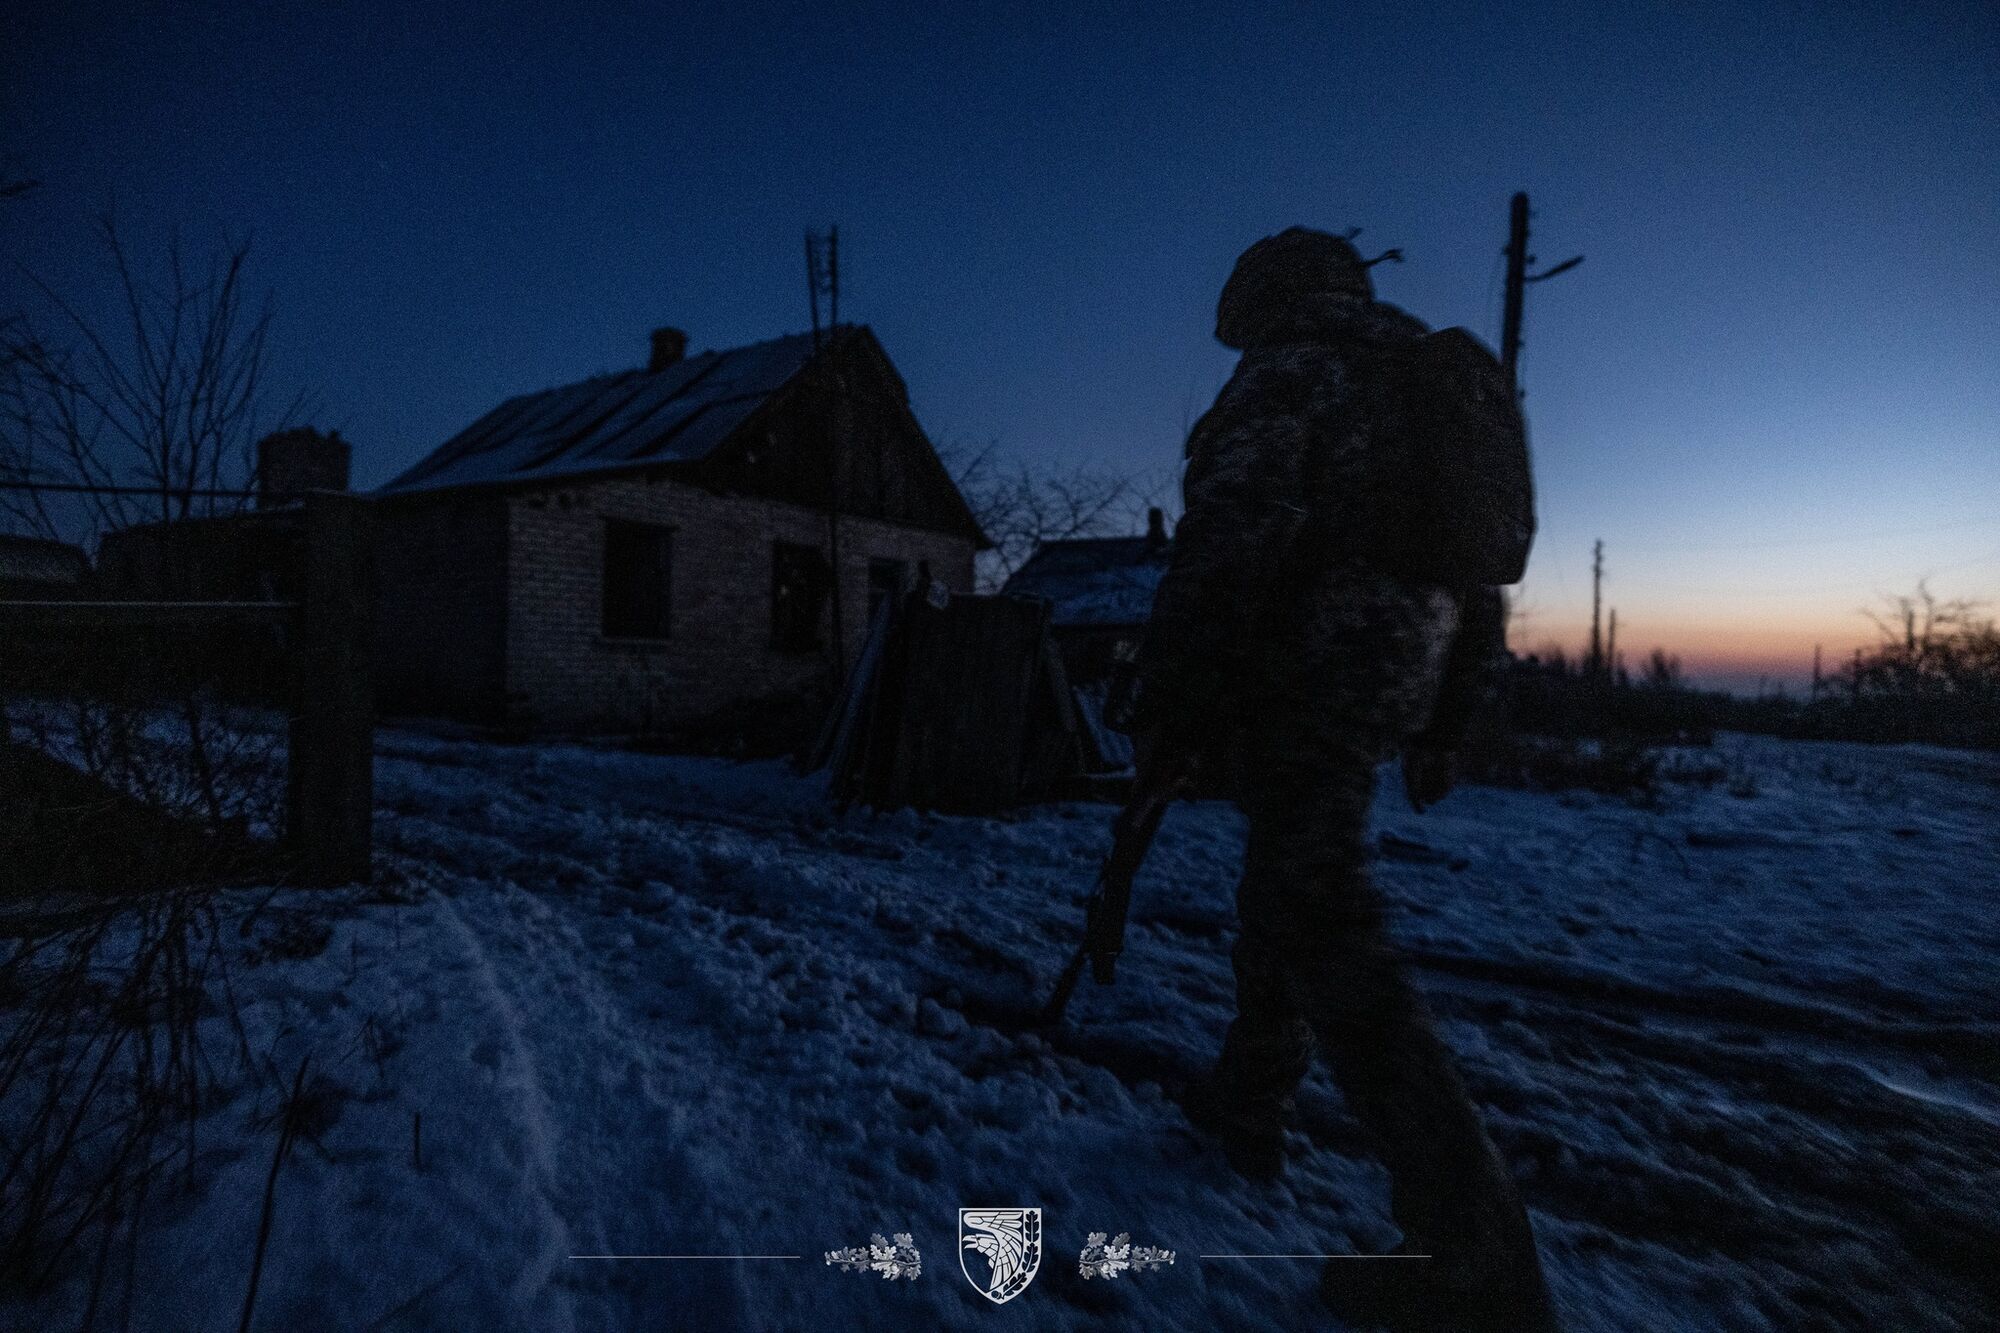 Fire and cold: how the soldiers of the 93rd Brigade are fighting near Bakhmut